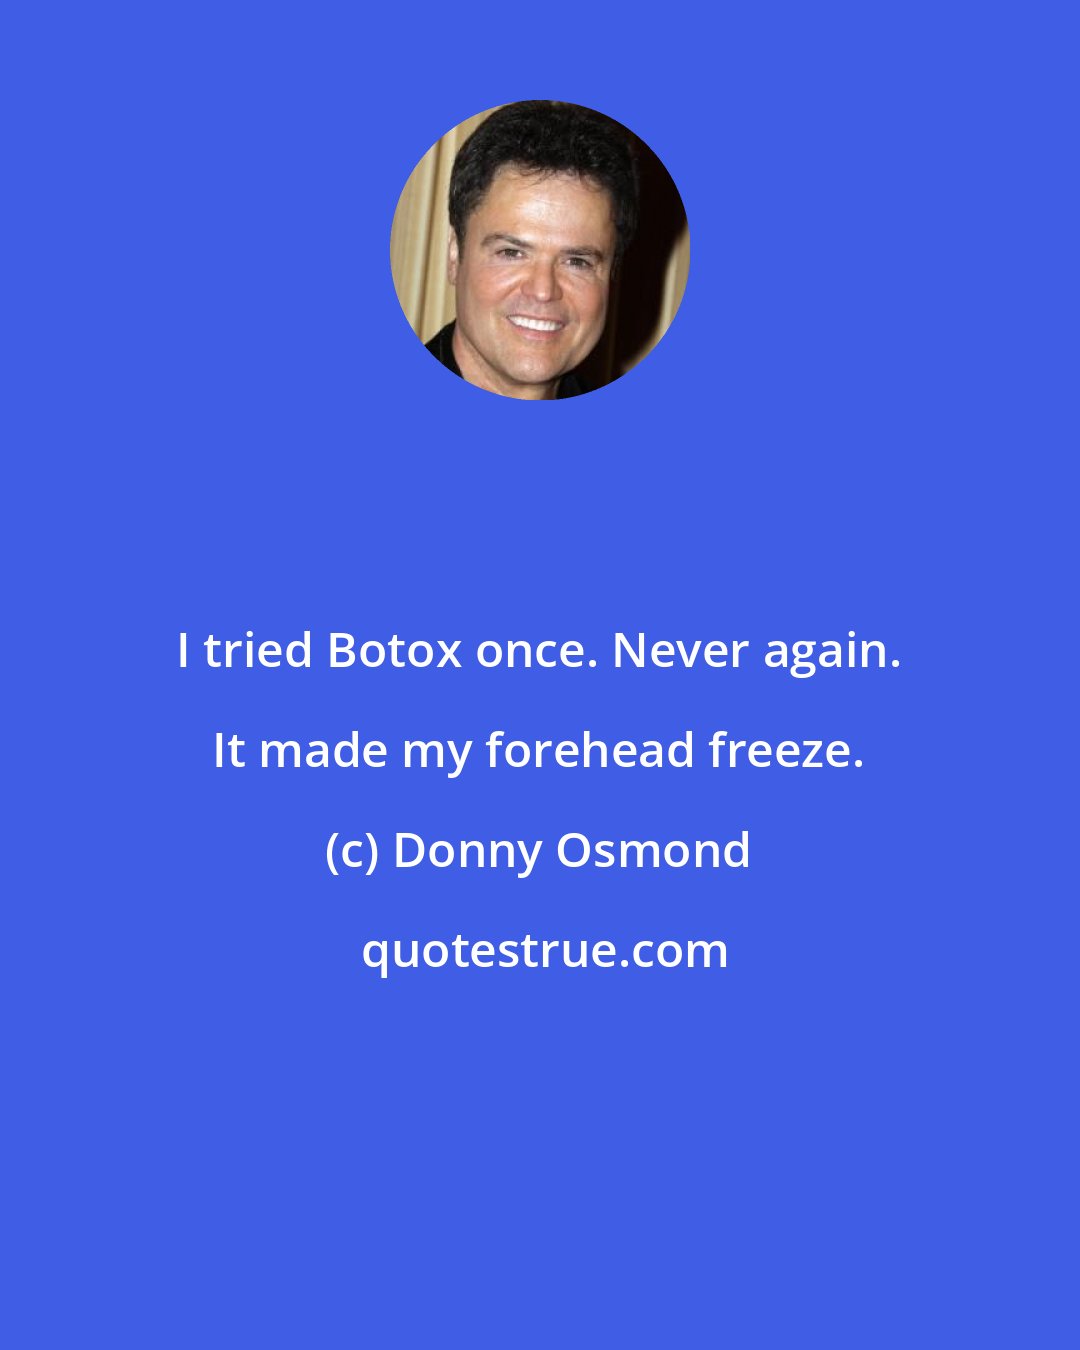 Donny Osmond: I tried Botox once. Never again. It made my forehead freeze.